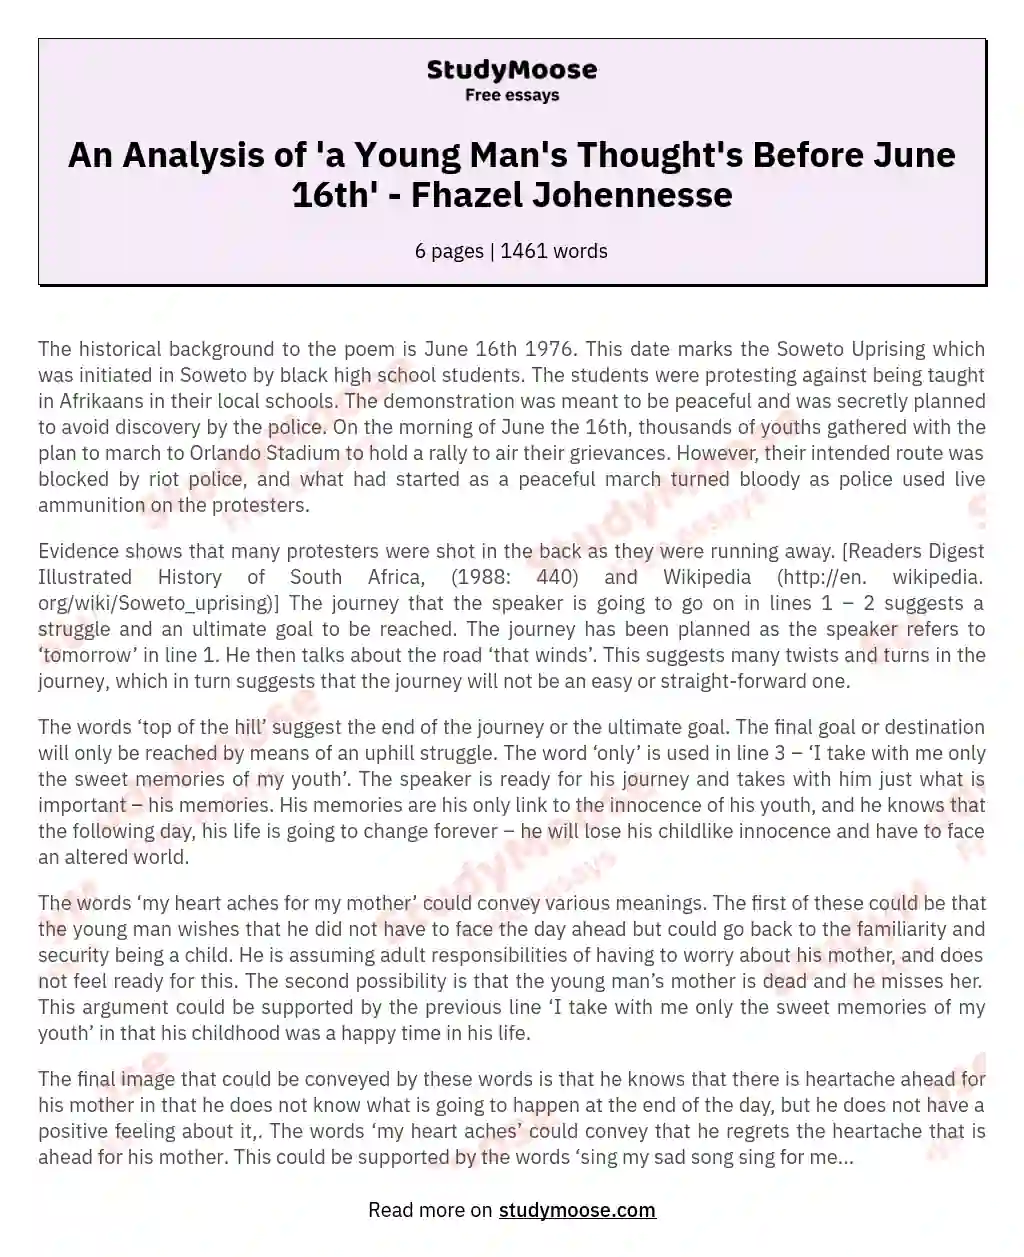 An Analysis of 'a Young Man's Thought's Before June 16th' - Fhazel Johennesse essay